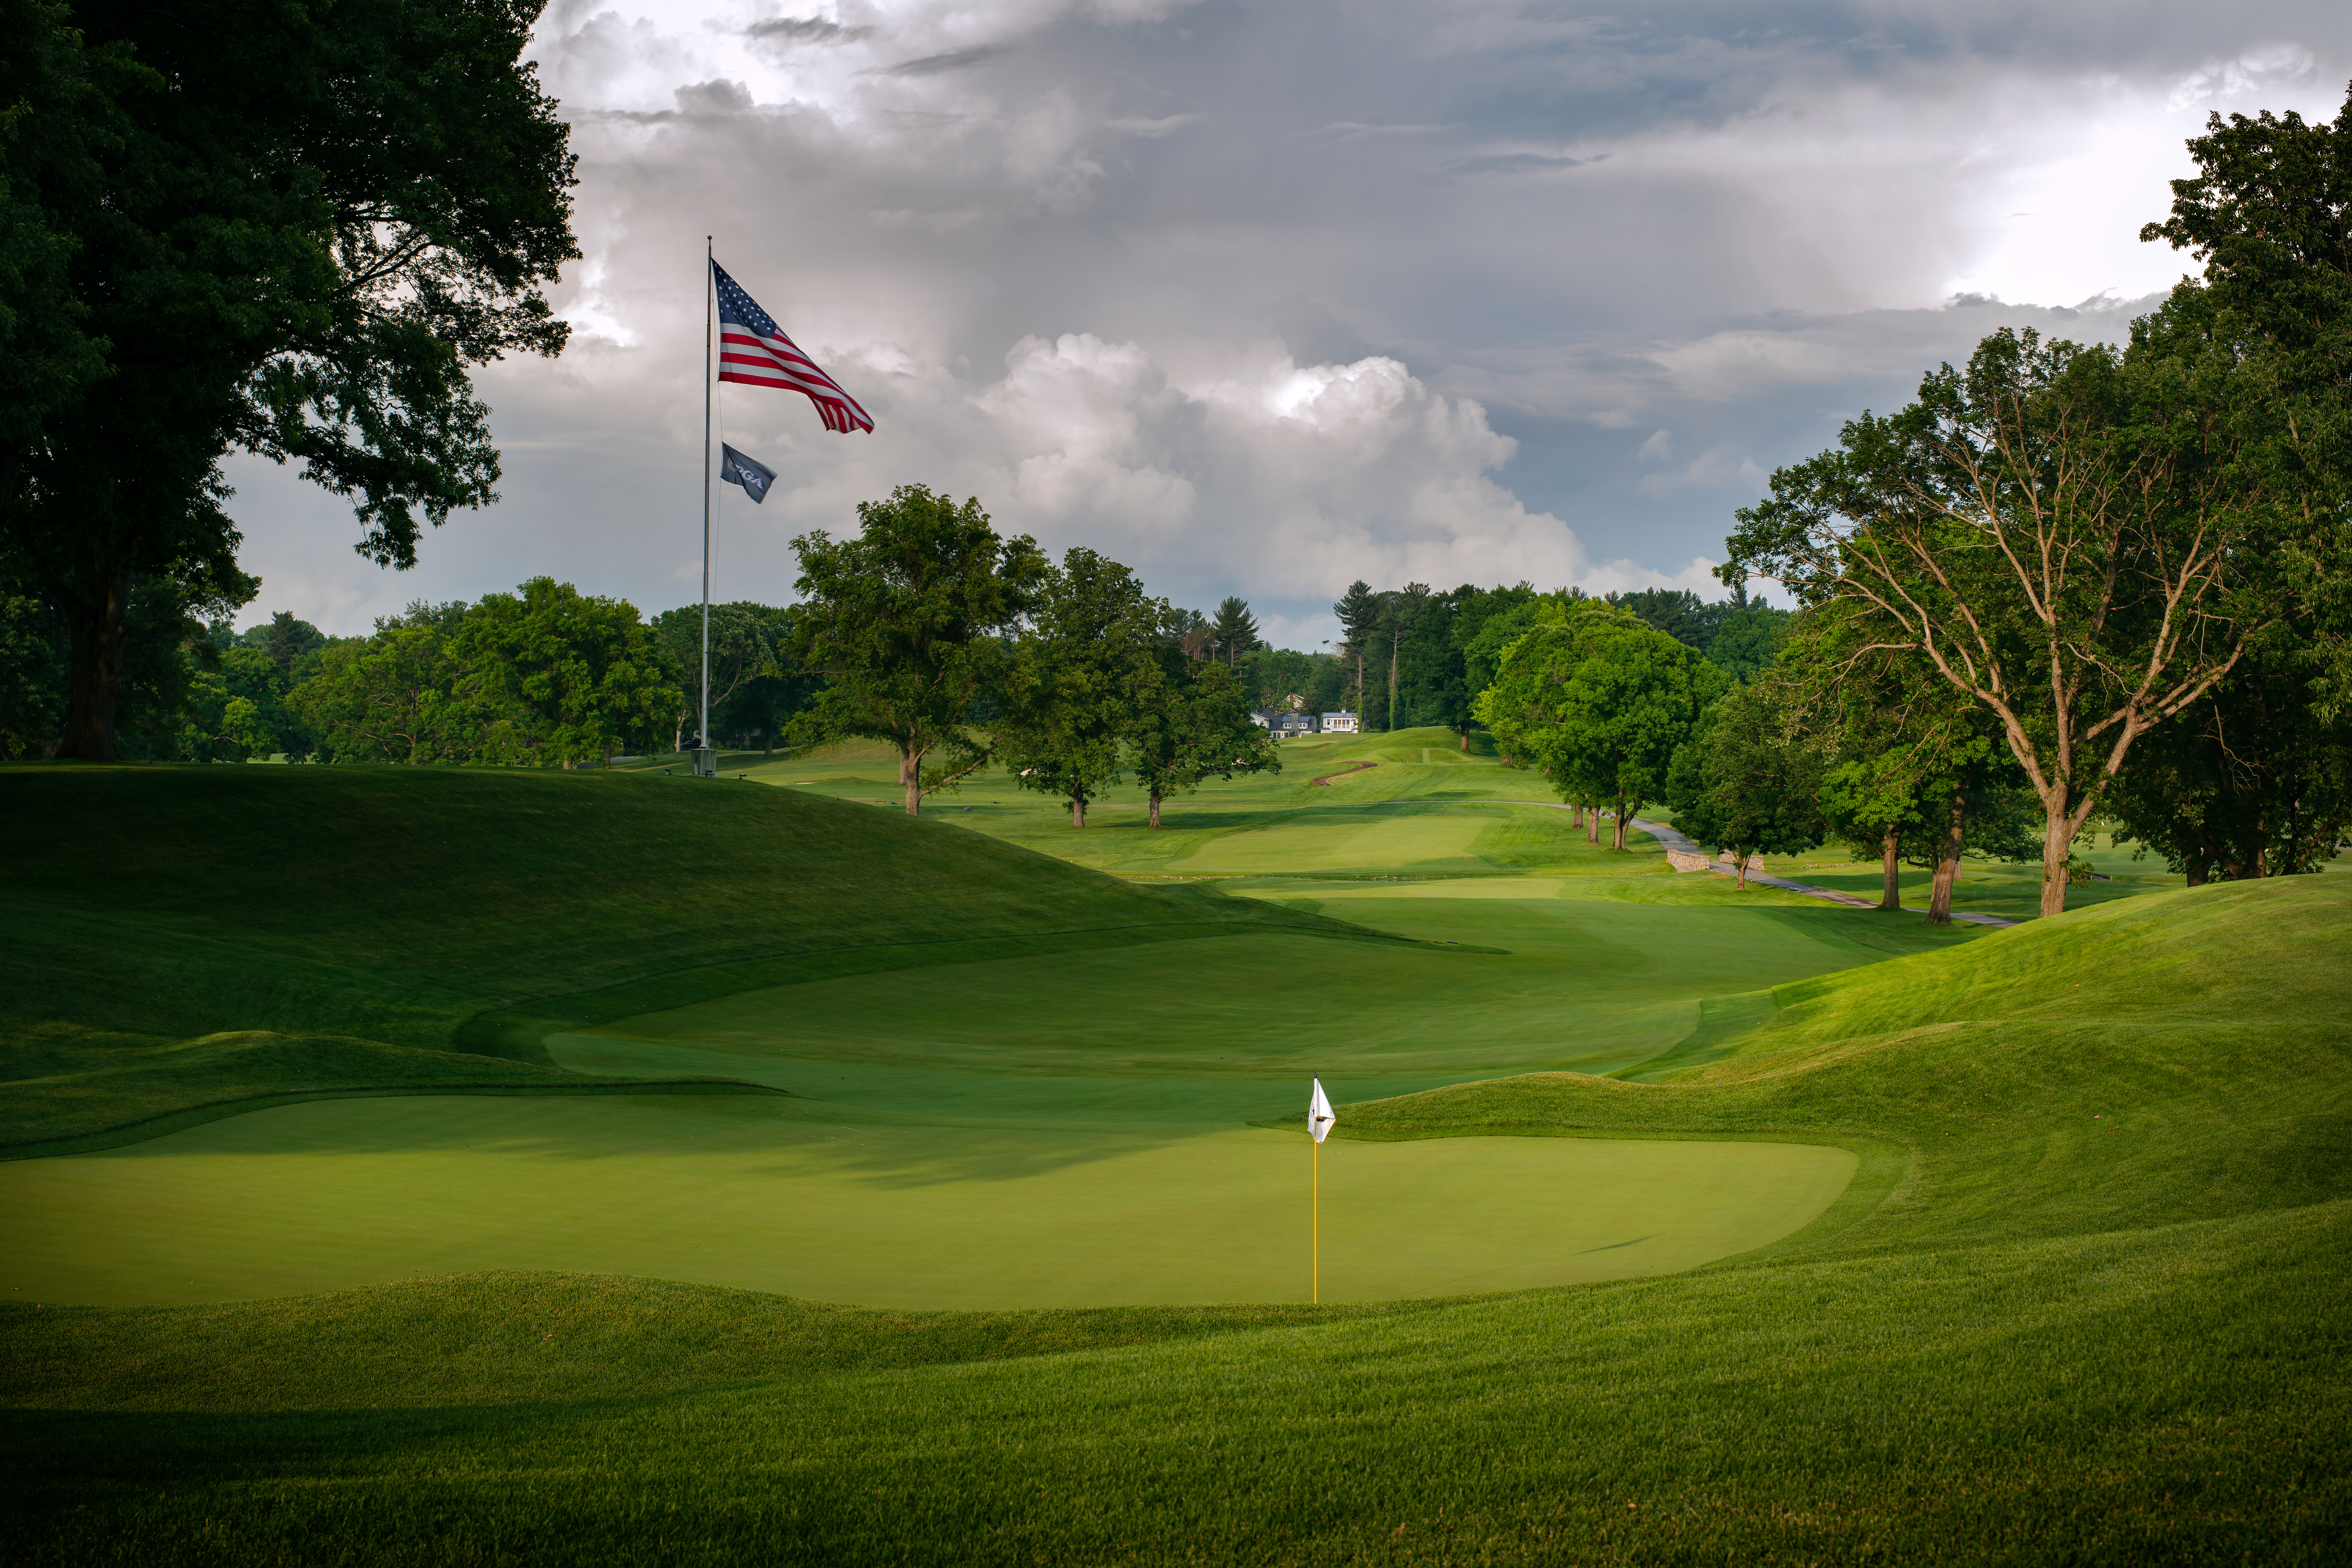 The 13th hole of the East Course at Oak Hill Country Club. (Gary Kellner/PGA of America)